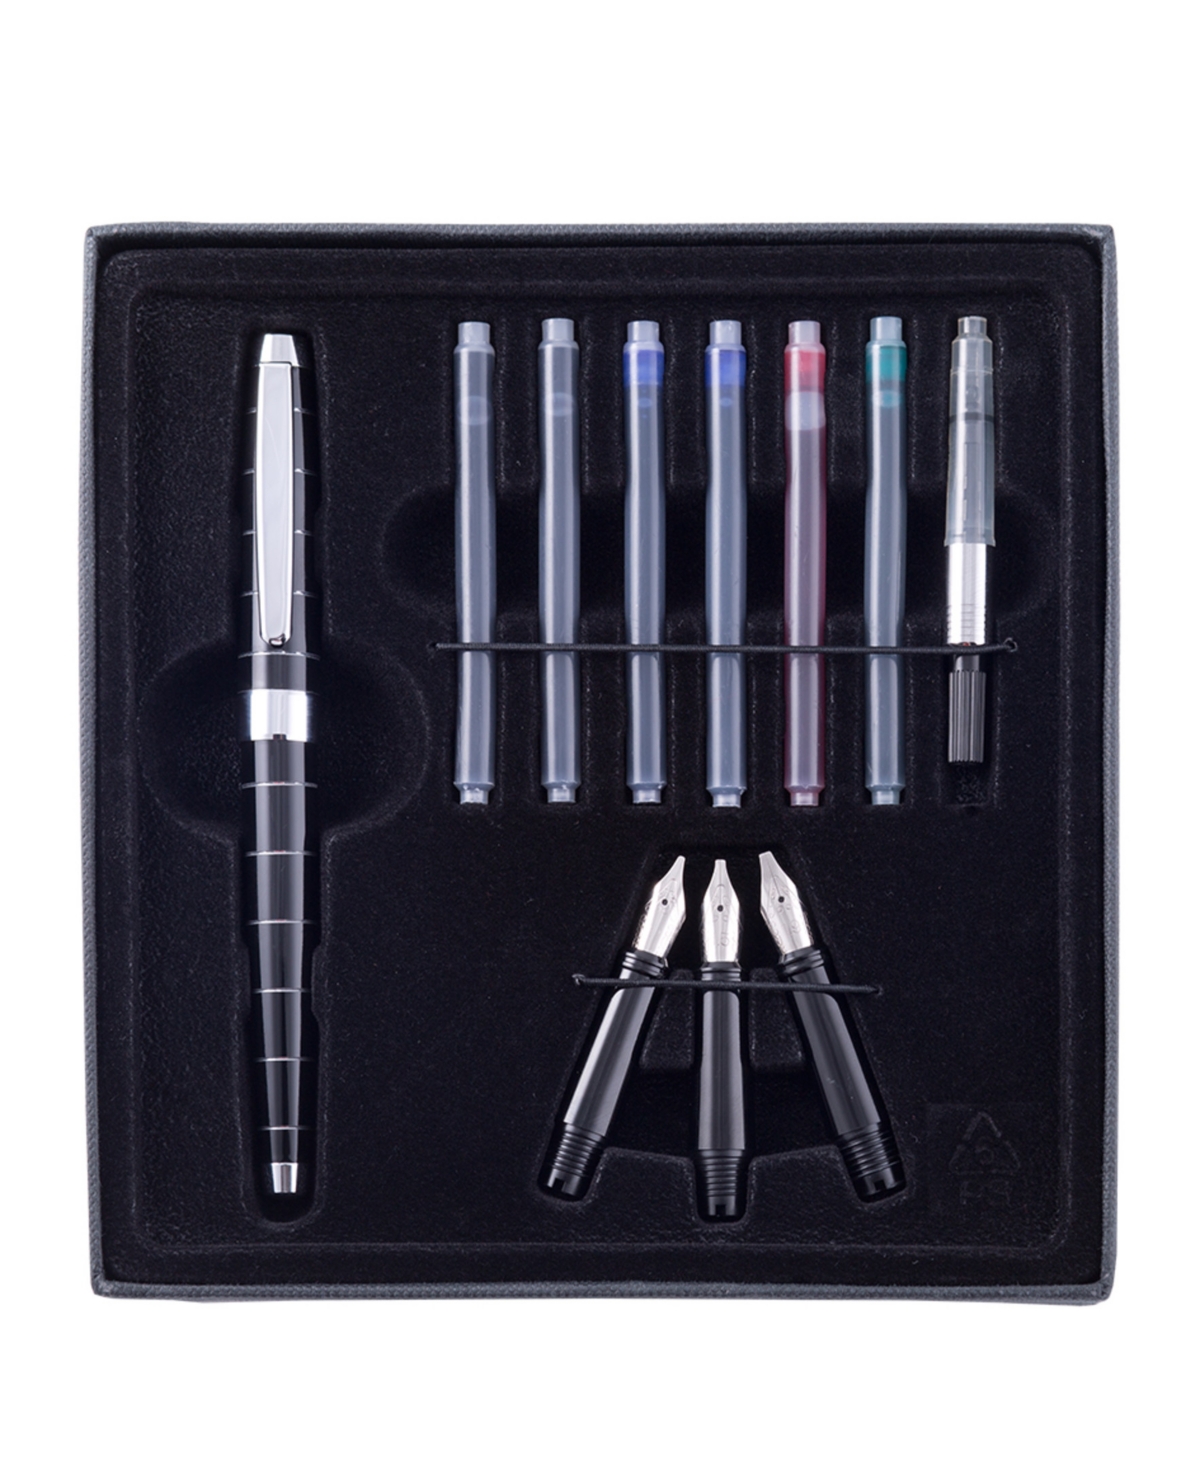 Calligraphy Writing Set, 11 Pieces - Multi